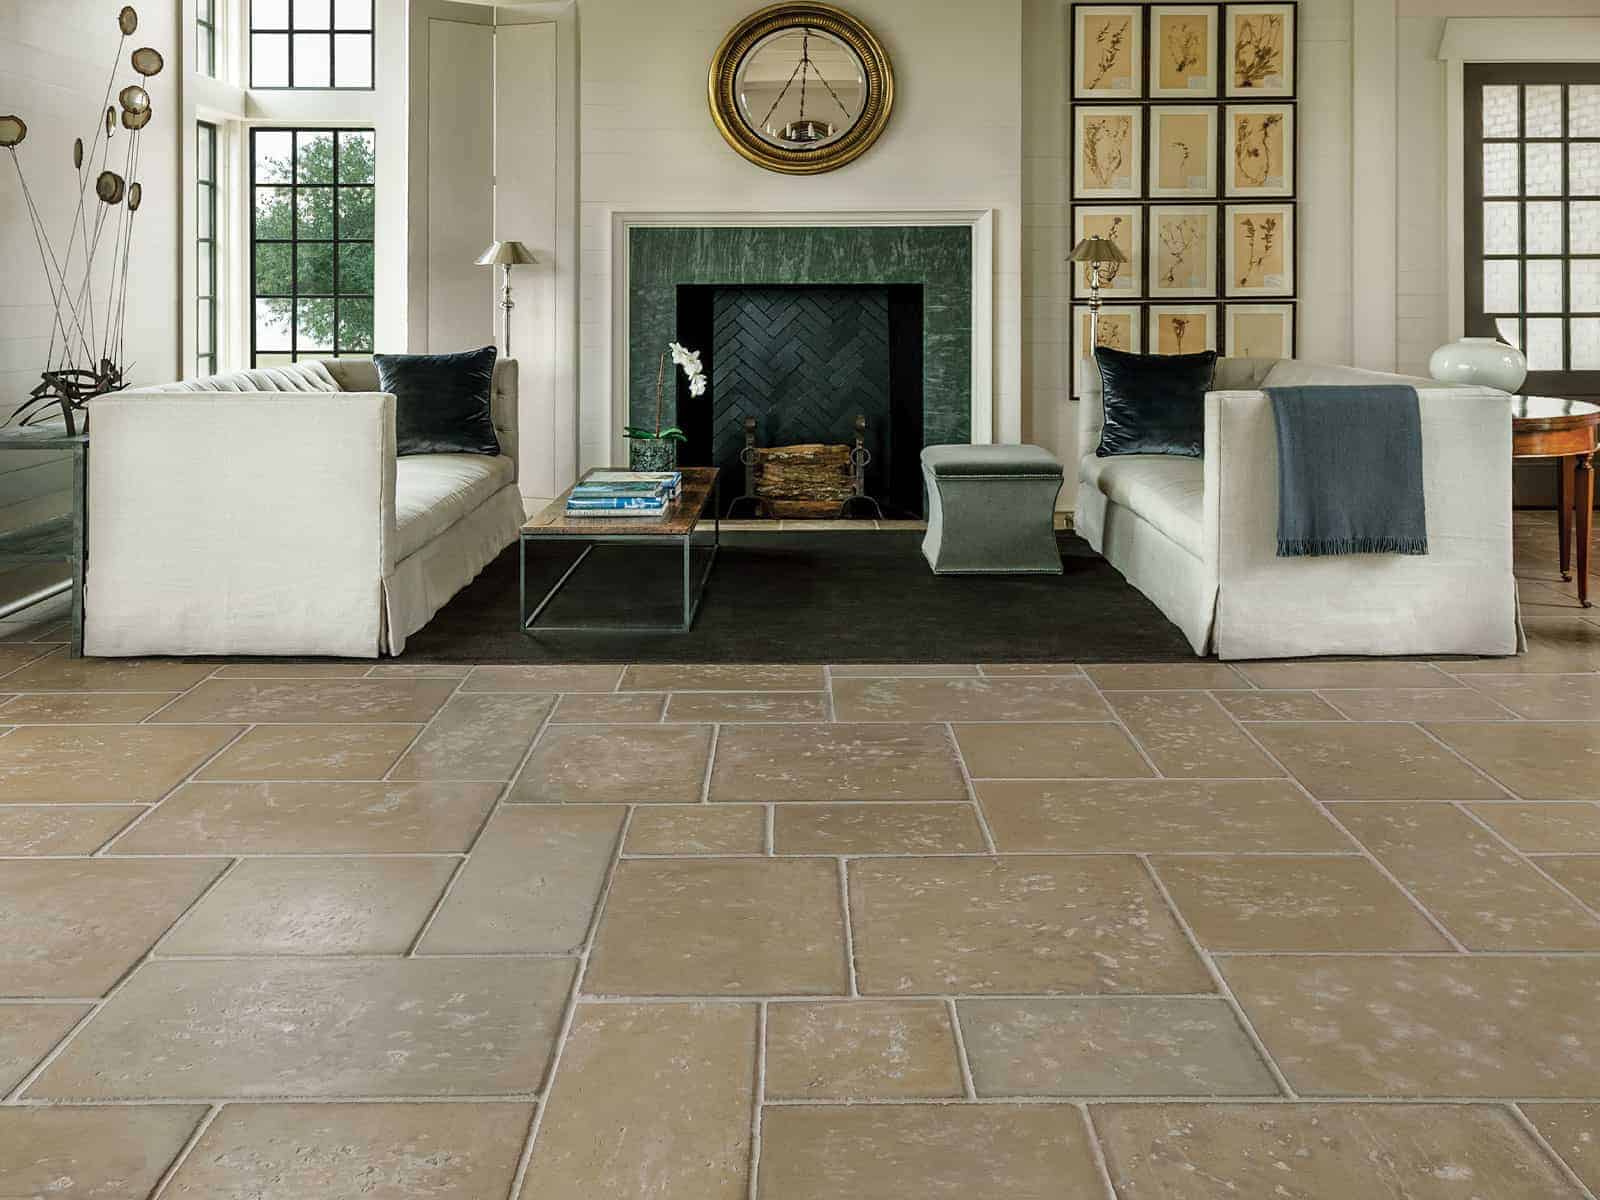 Concrete pavers in this Texas great room with buff color adds a sense of warmth